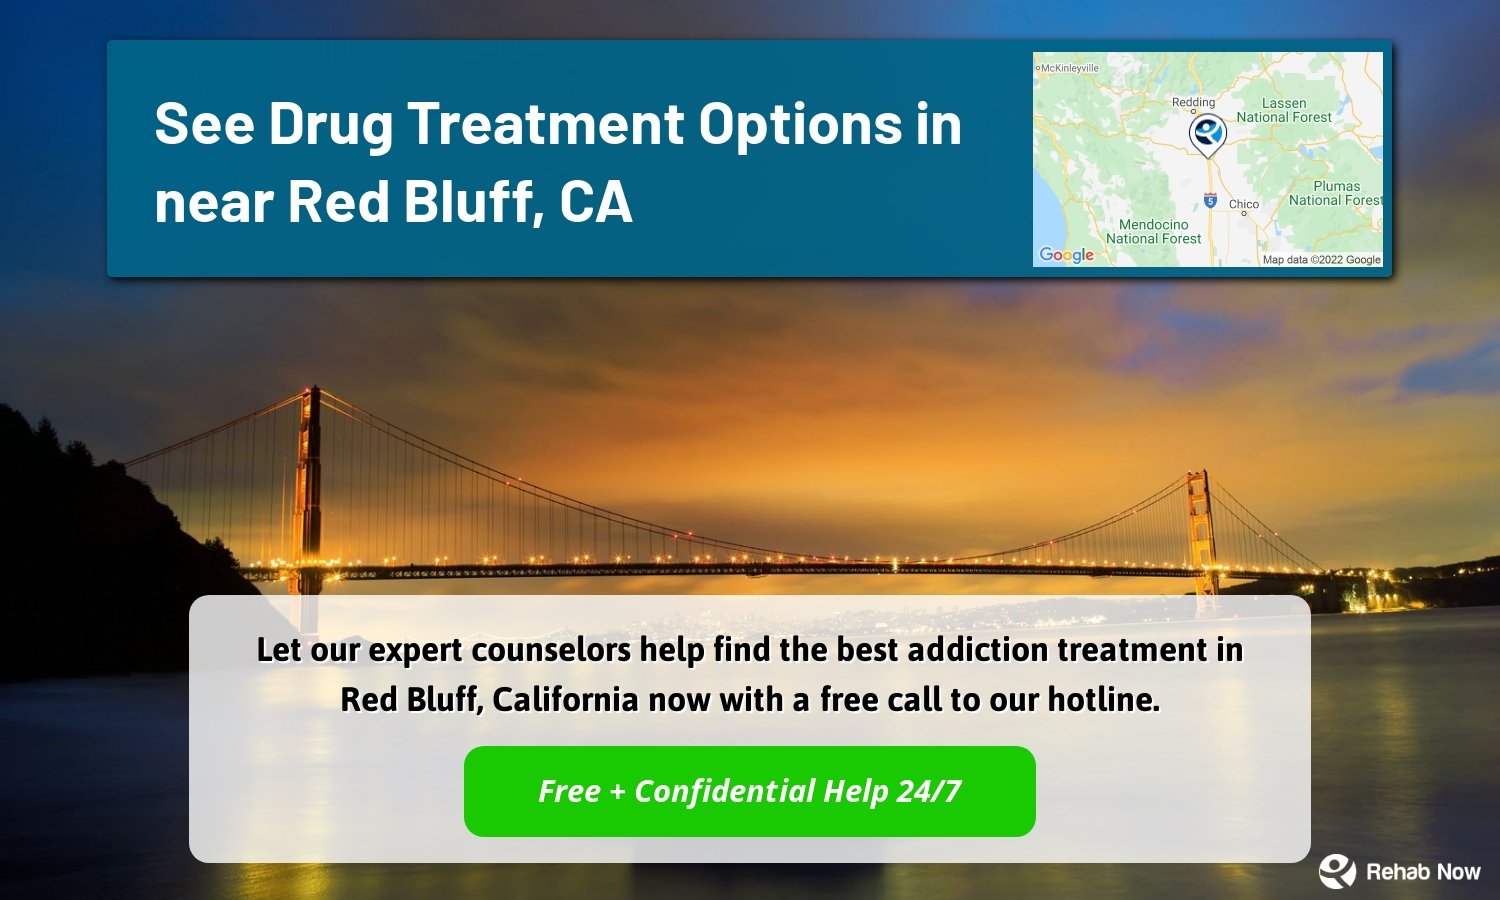 Let our expert counselors help find the best addiction treatment in Red Bluff, California now with a free call to our hotline.